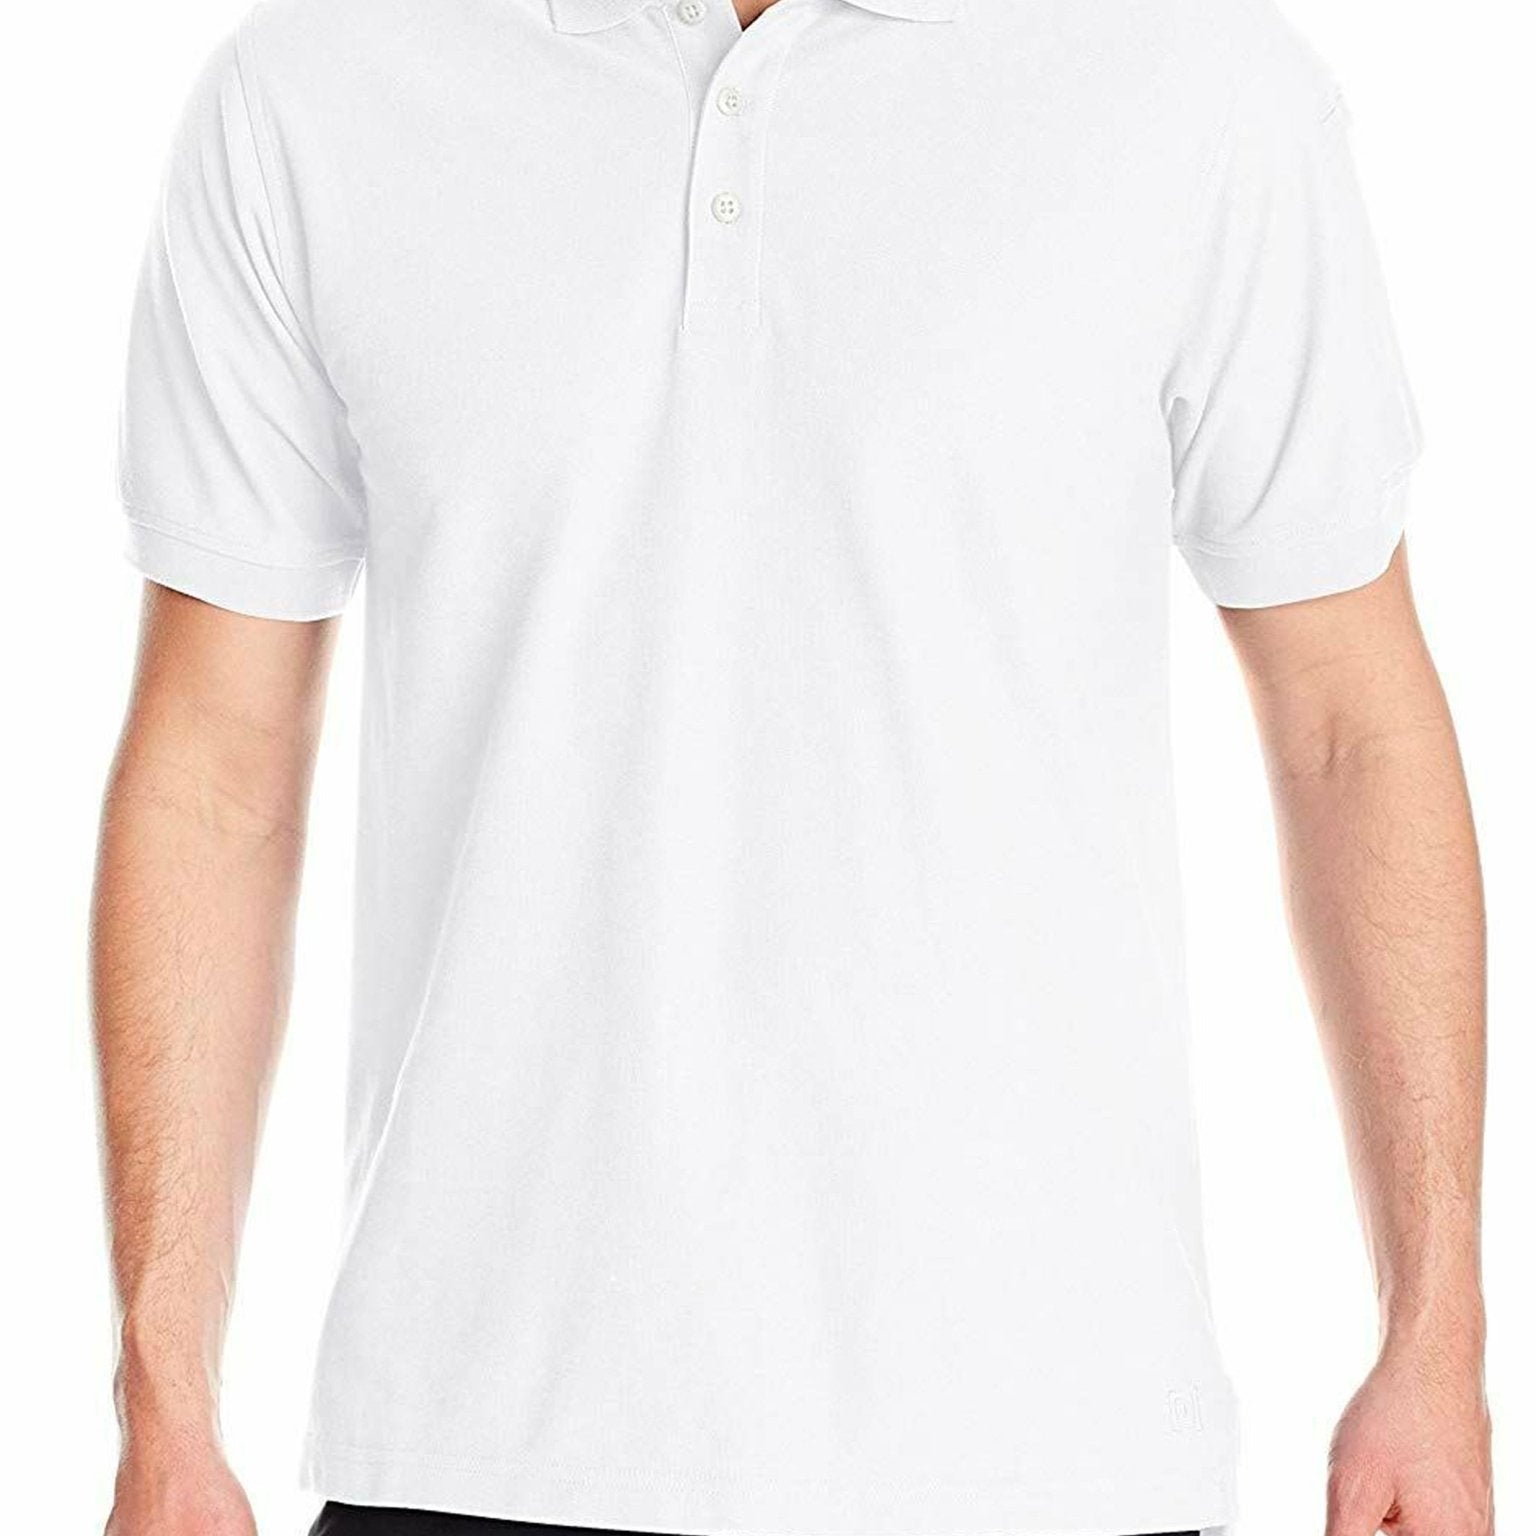 4elementsclothing5.11 Tactical5.11 Tactical - 5.11 Utility Short Sleeve Polo Shirt - Cotton / Polyester Pique - Style 41180T-Shirt41180-010-XS